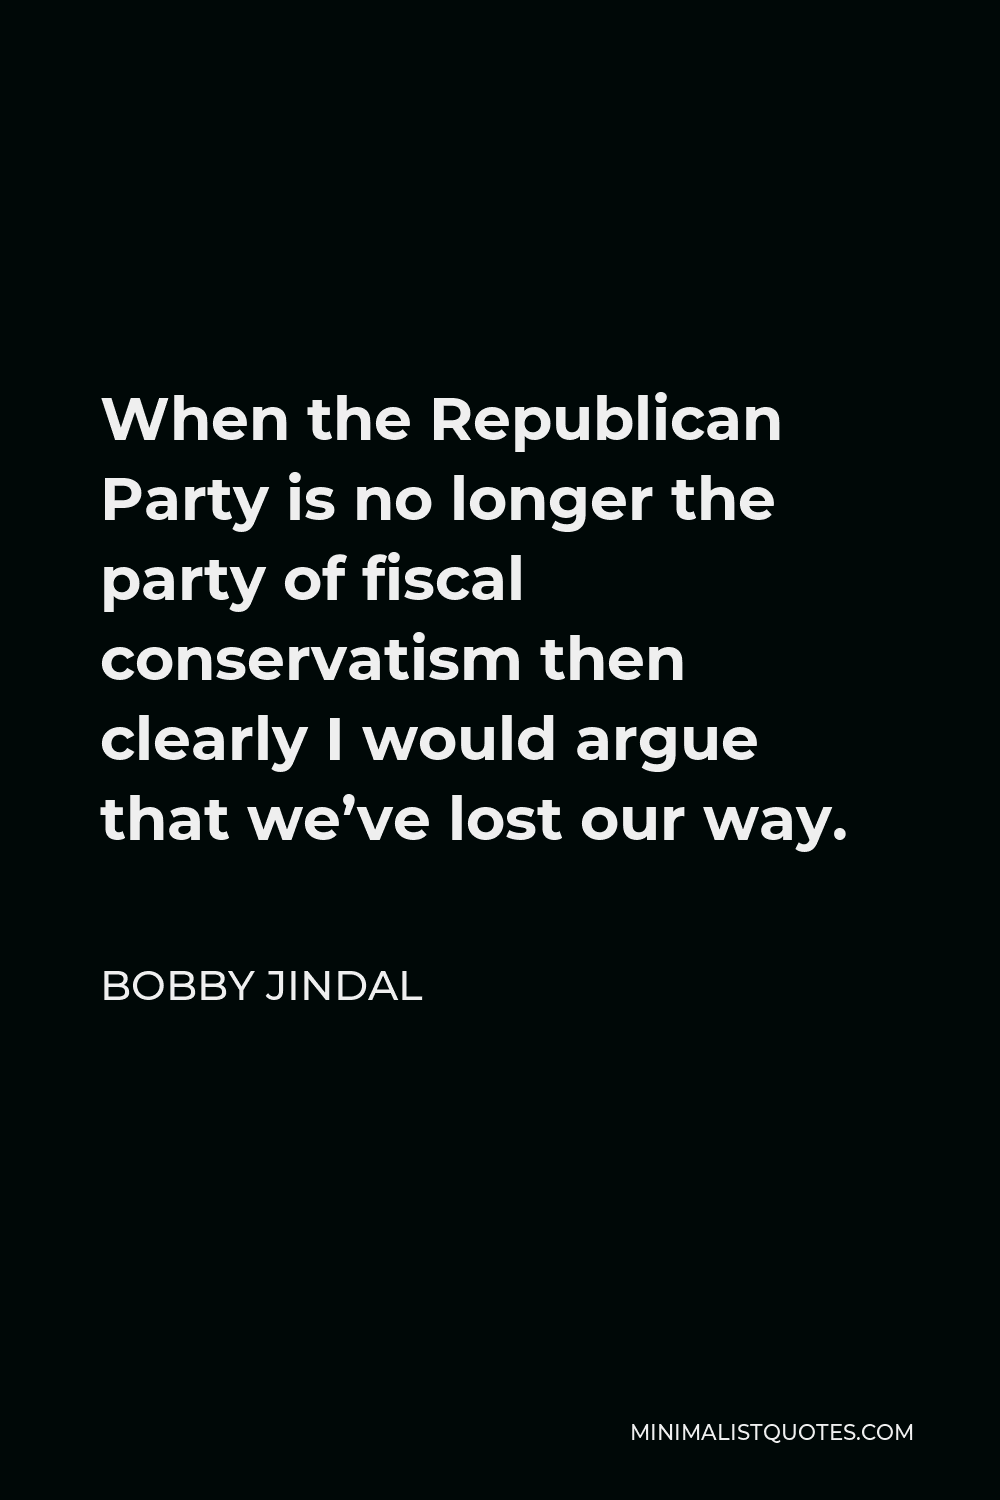 Bobby Jindal Quote - When the Republican Party is no longer the party of fiscal conservatism then clearly I would argue that we’ve lost our way.